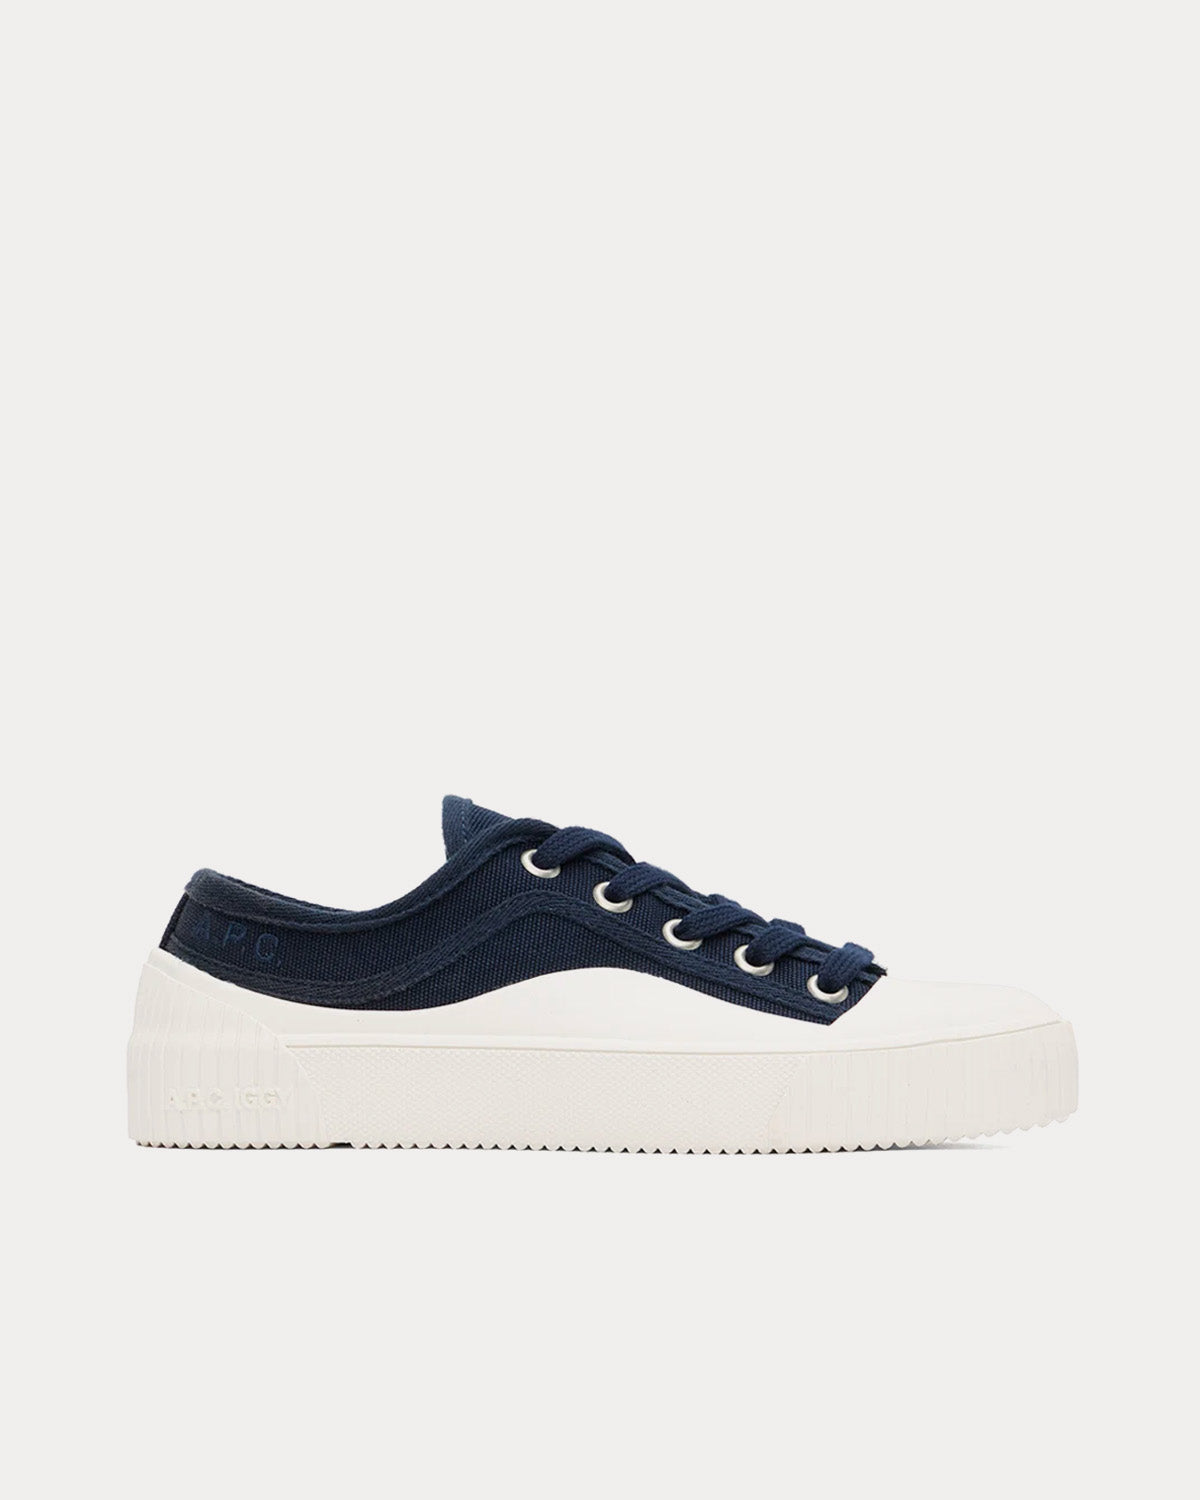 A.P.C. - Iggy Basse Navy Low Top Sneakers